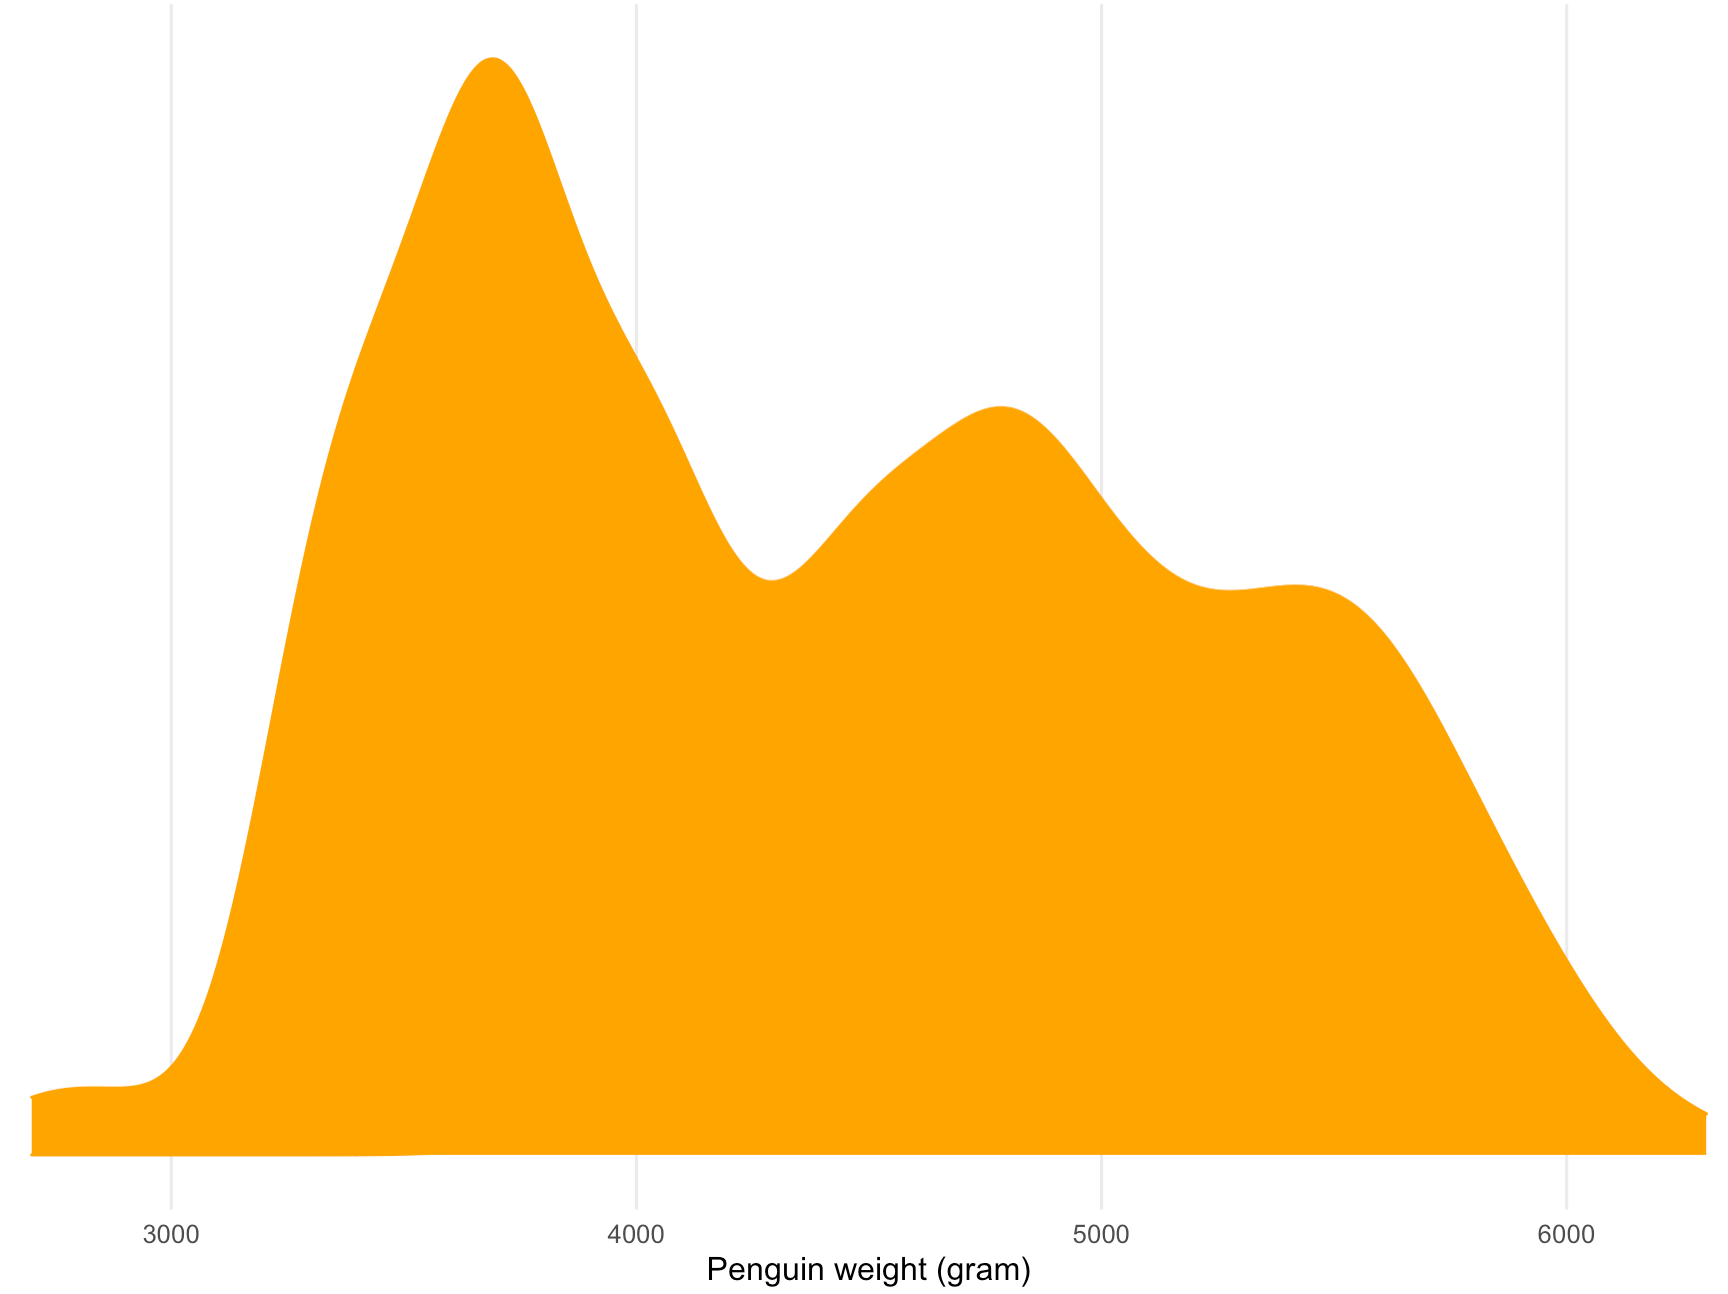 A density plot of the weight of 192 penguins. The plot shows 2 peaks in the distribution